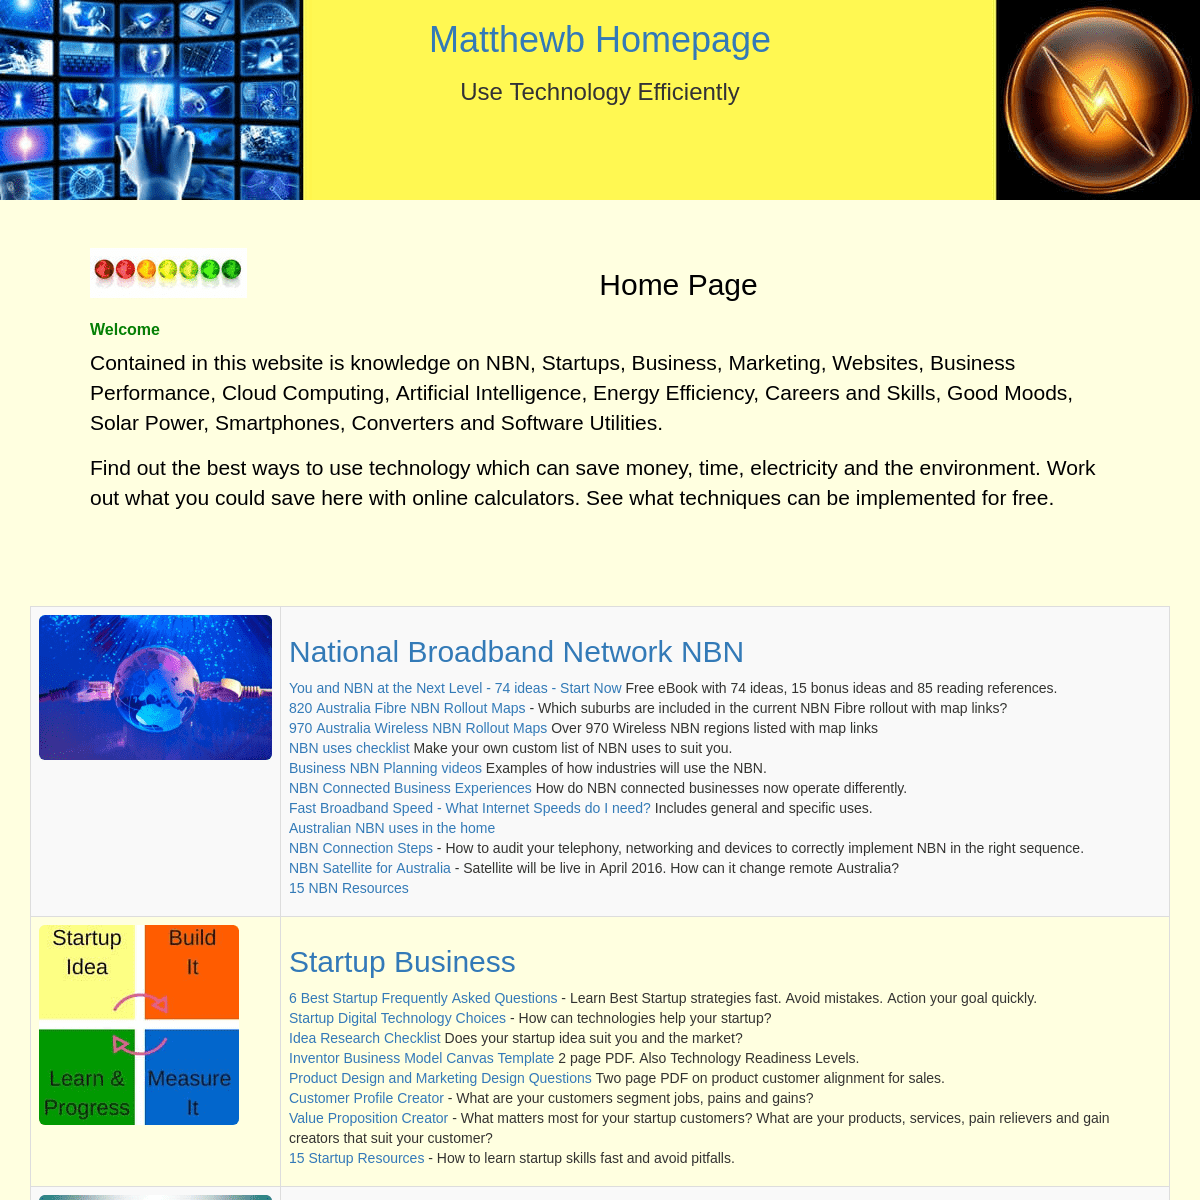 Matthewb Homepage - Use Technology Efficiently - Hundreds of Resources